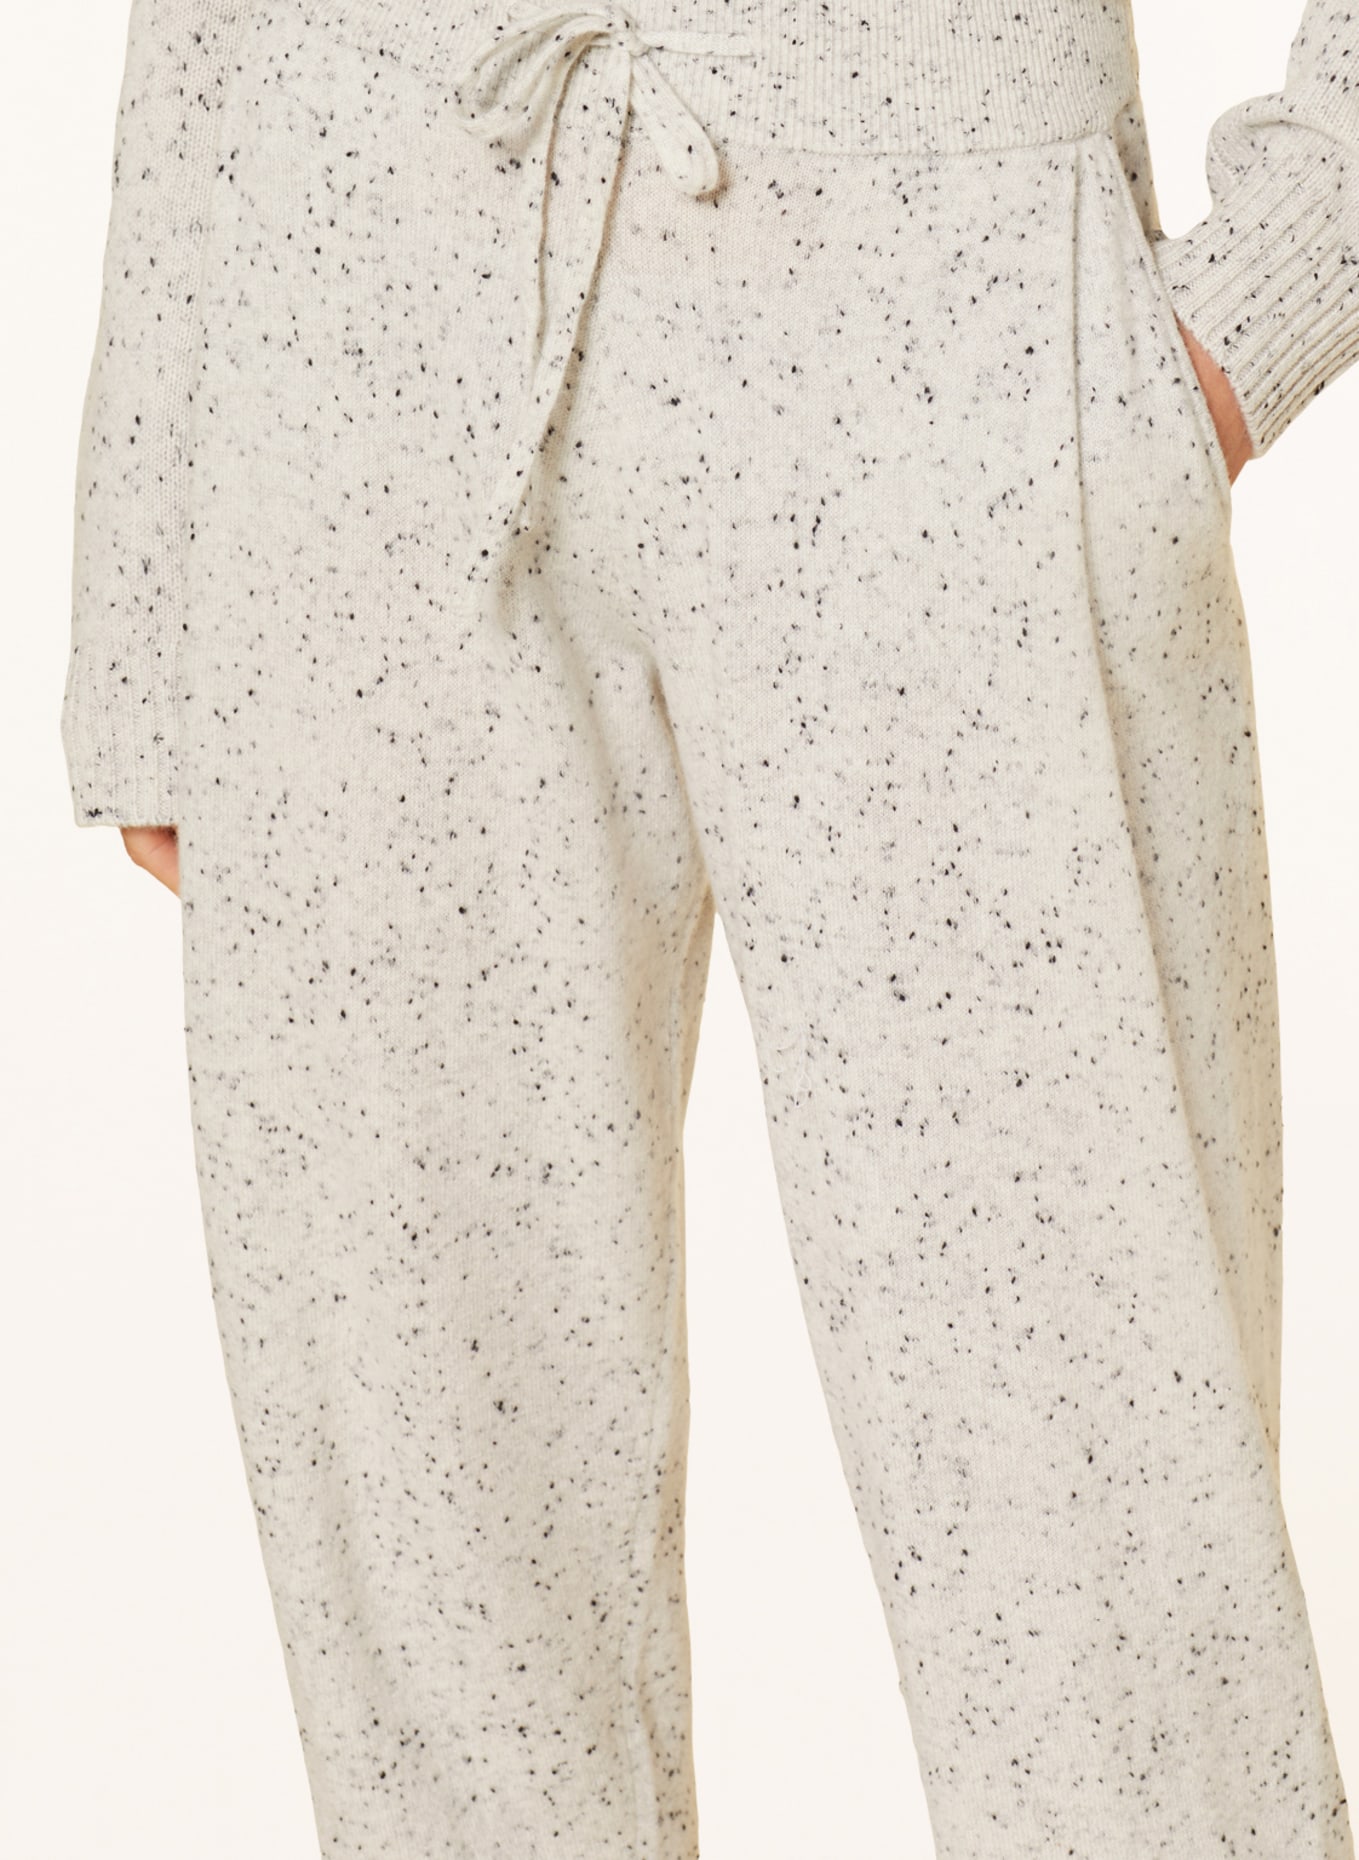 LISA YANG Knit trousers JO made of cashmere in jogger style, Color: LIGHT GRAY/ DARK GRAY (Image 5)